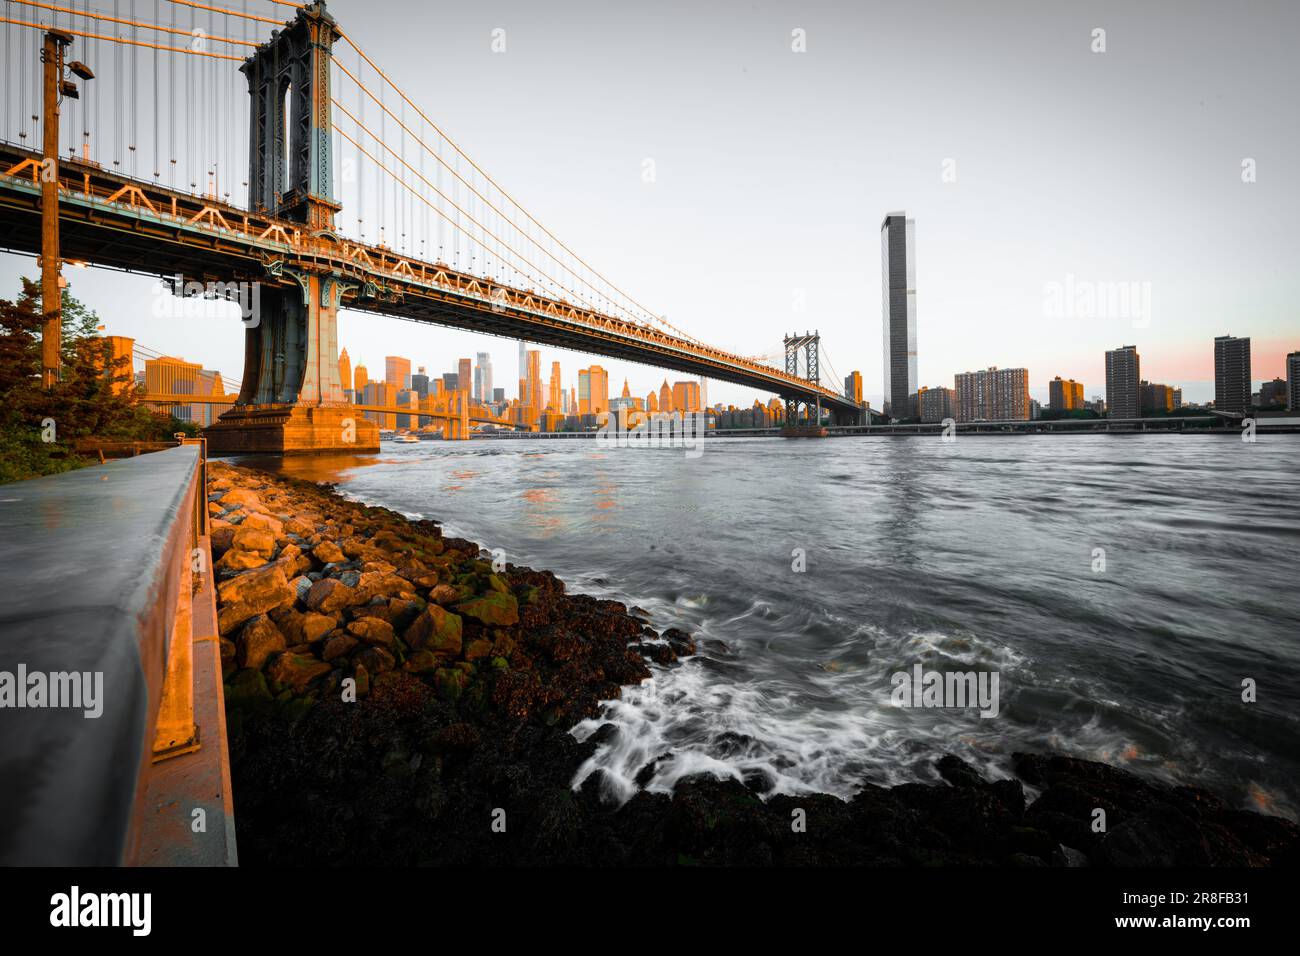 A scenic view from the bank of a river to the Manhattan Bridge. Stock Photo